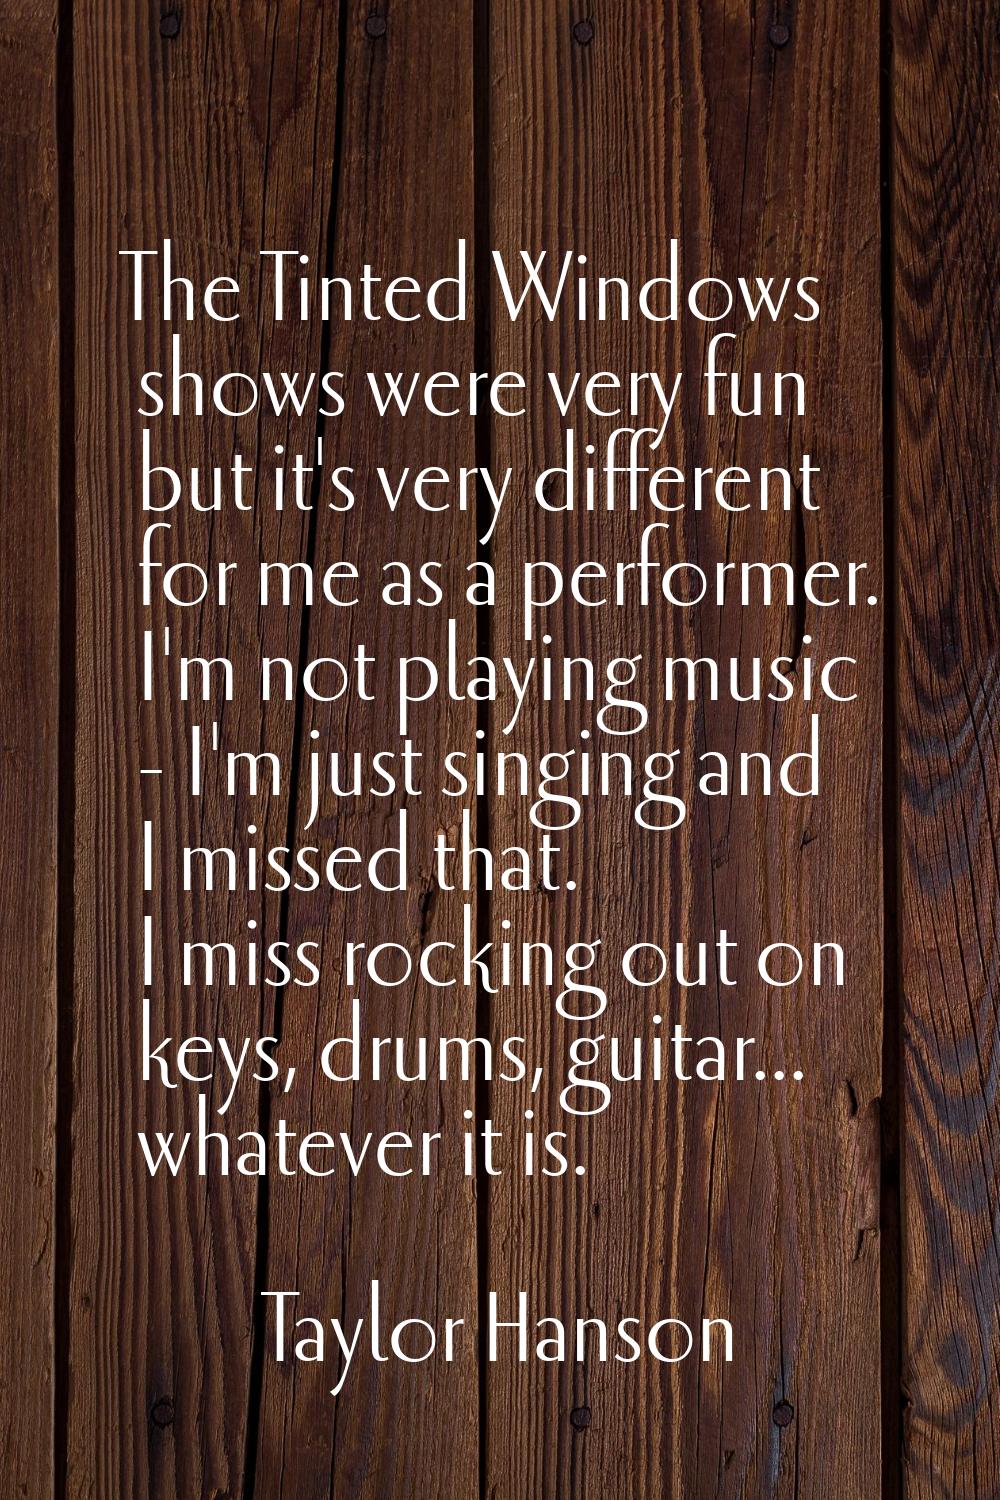 The Tinted Windows shows were very fun but it's very different for me as a performer. I'm not playi